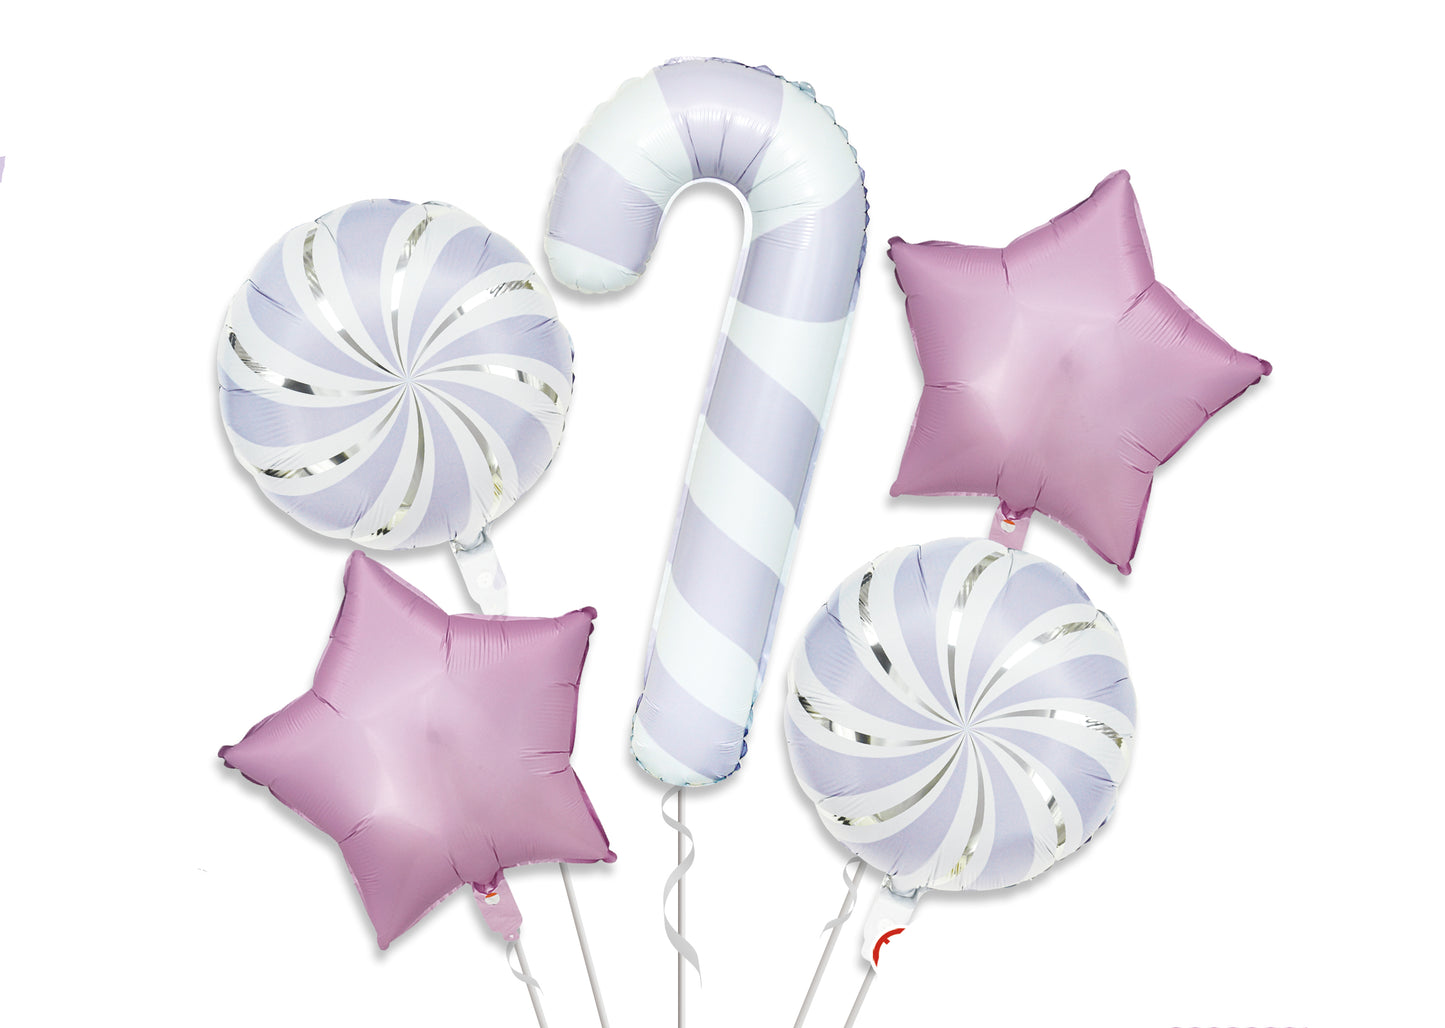 Winner Party Candy Lavender Balloon Bouquet 5pc